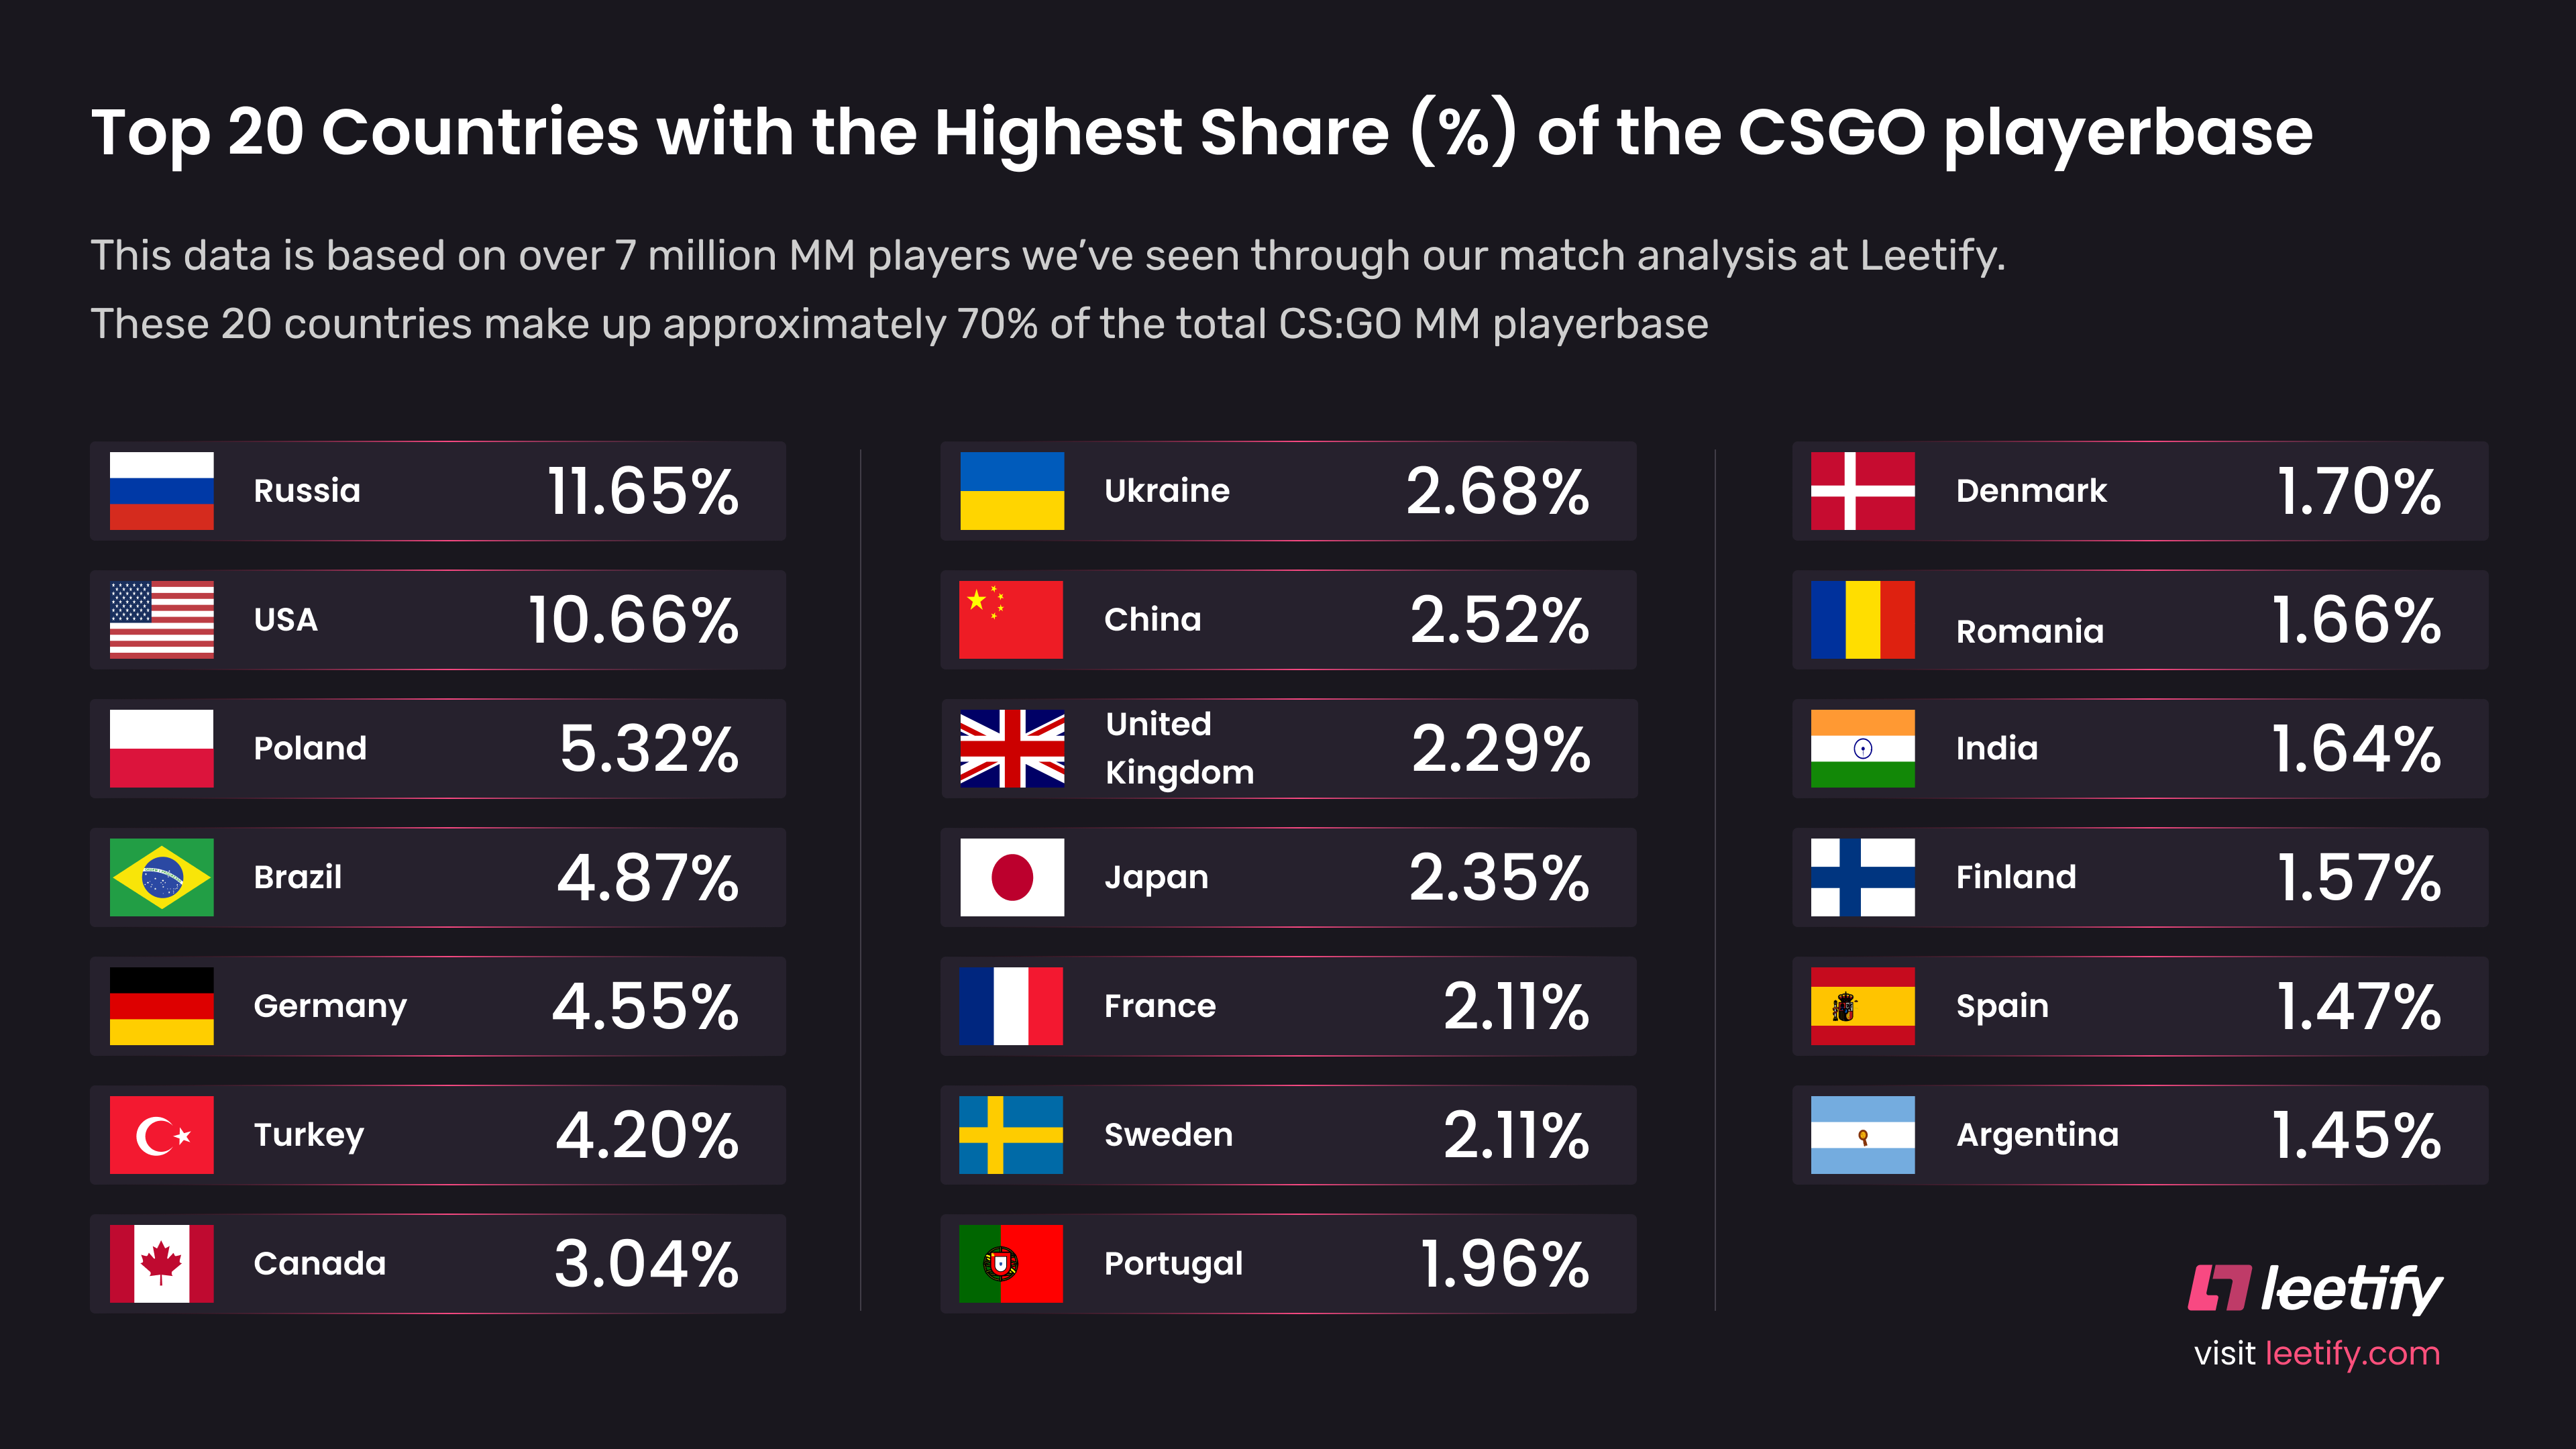 The top 20 countries with the highest percentage of the CS:GO playerbase